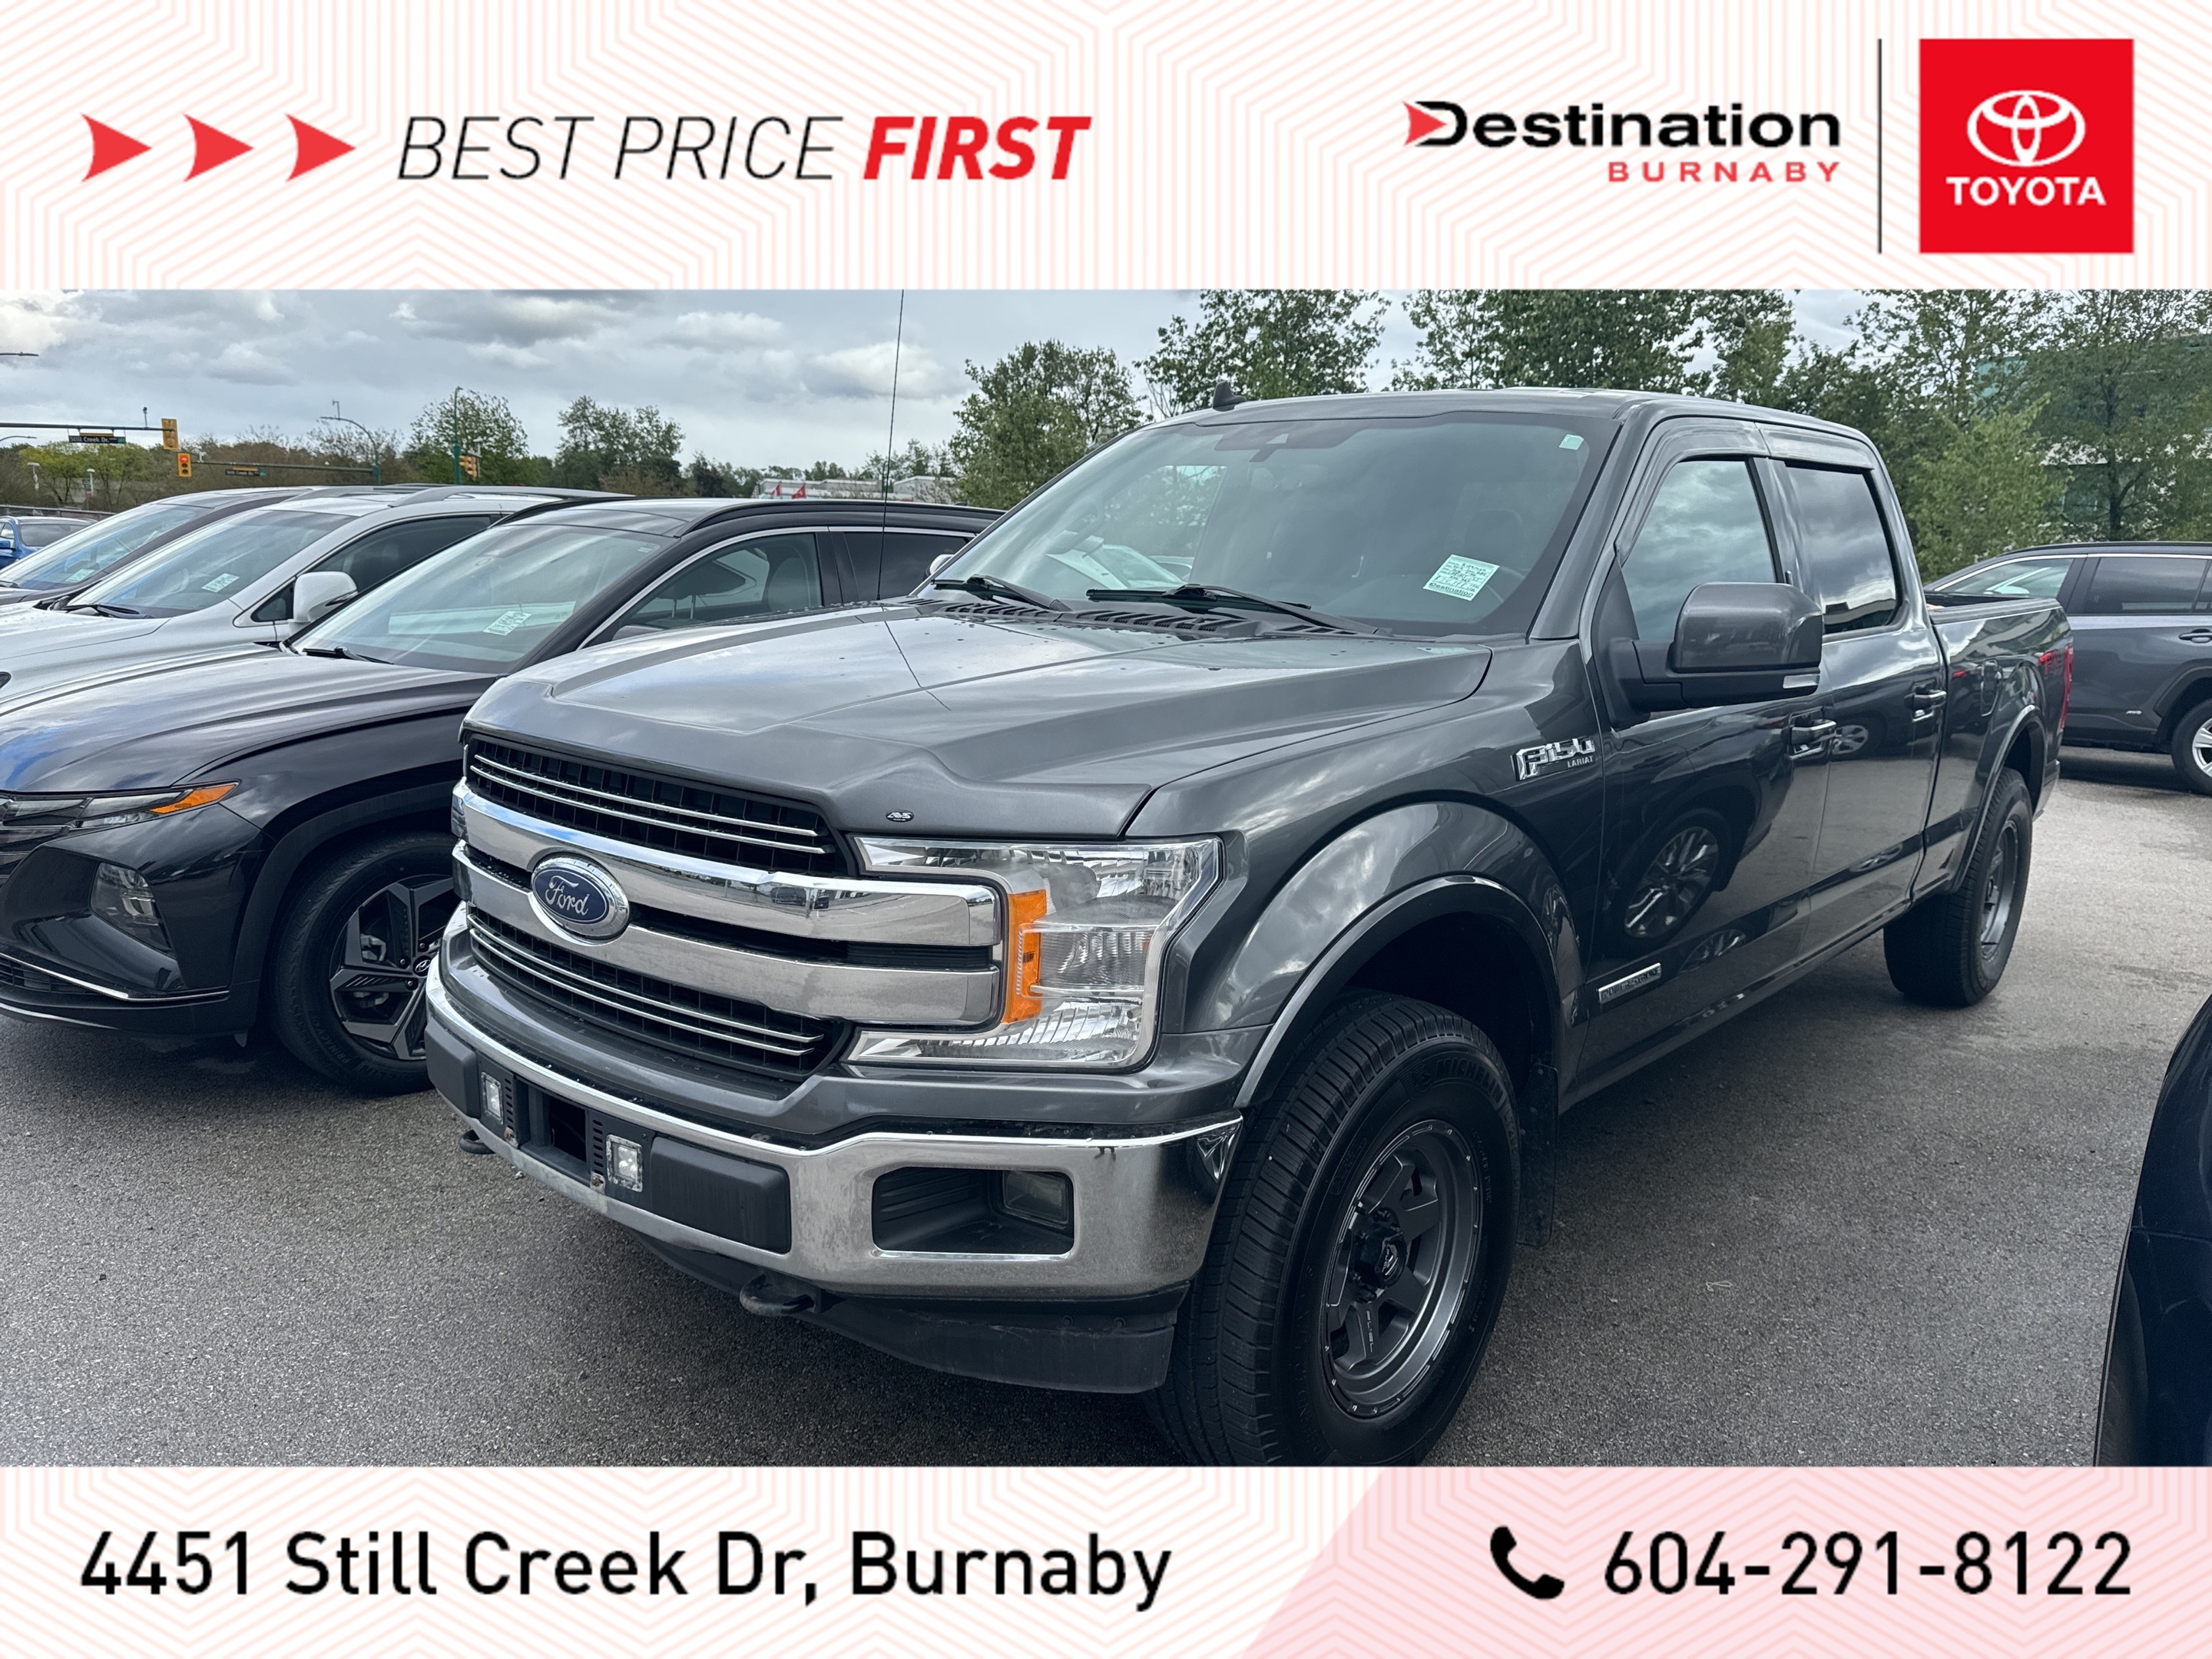 2019 Ford F-150 Supercrew Lariat - Local No Accidents 1owner!